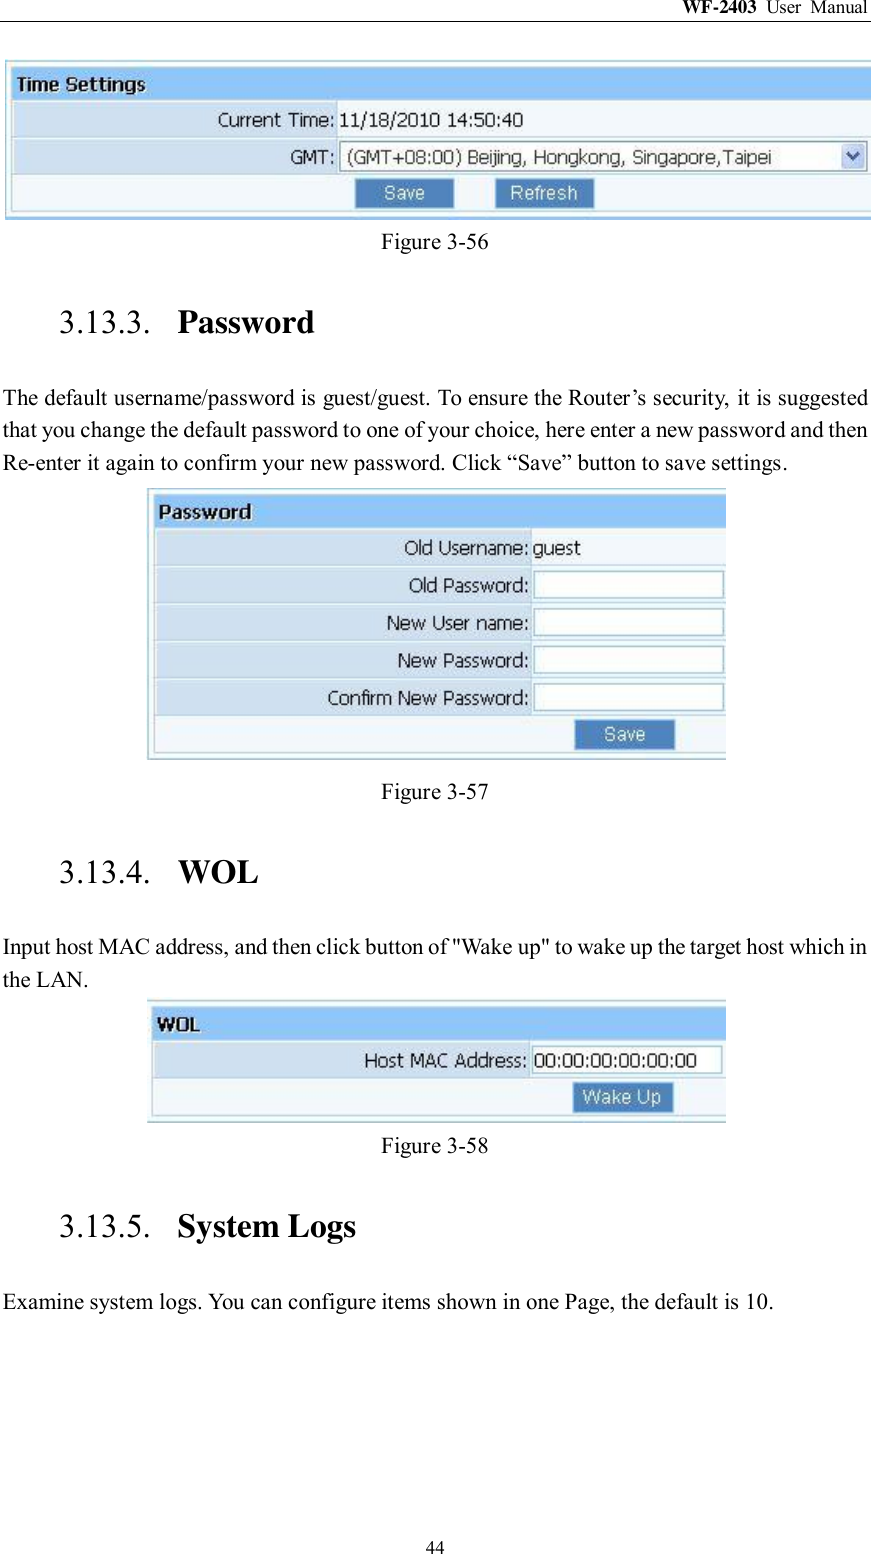 WF-2403  User  Manual  44  Figure 3-56 3.13.3. Password The default username/password is guest/guest. To ensure the Router‟s security, it is suggested that you change the default password to one of your choice, here enter a new password and then Re-enter it again to confirm your new password. Click “Save” button to save settings.  Figure 3-57 3.13.4. WOL Input host MAC address, and then click button of &quot;Wake up&quot; to wake up the target host which in the LAN.  Figure 3-58 3.13.5. System Logs Examine system logs. You can configure items shown in one Page, the default is 10. 